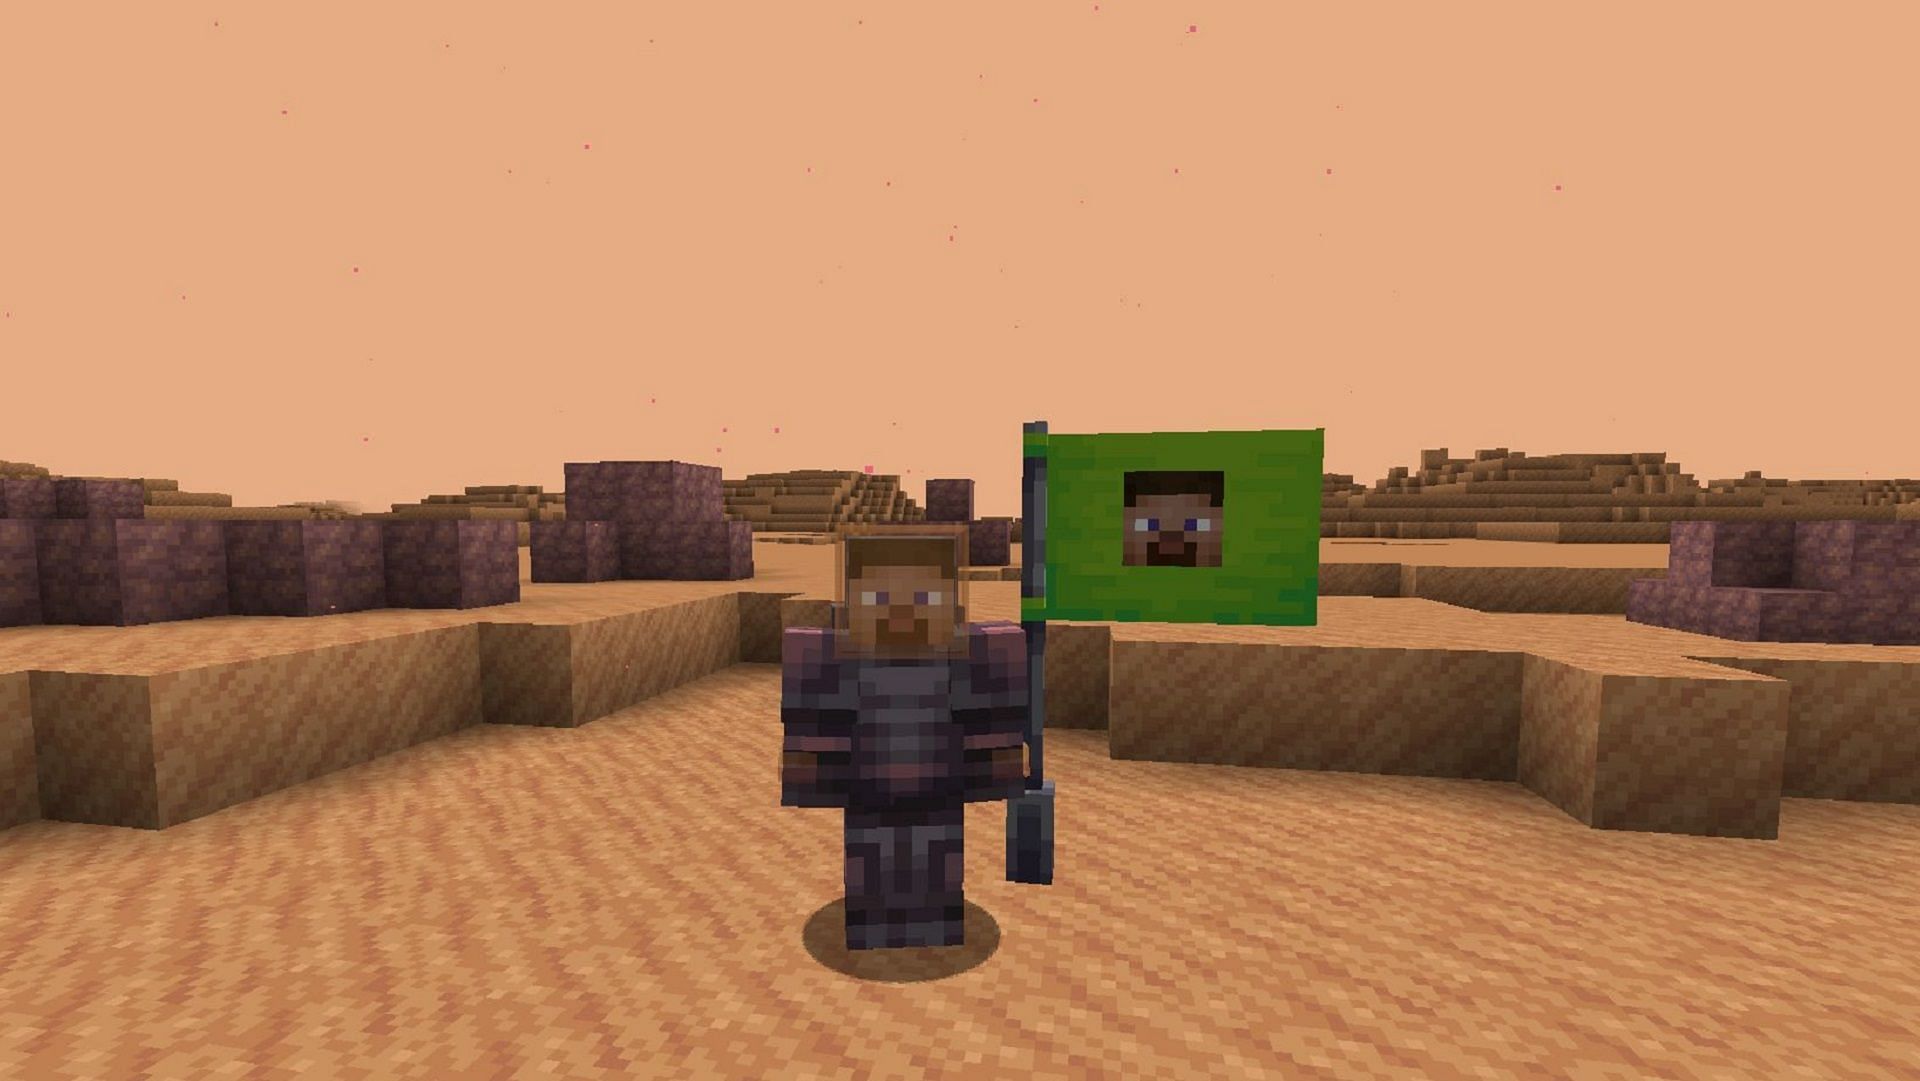 A Minecraft player stakes their claim on Mars in Ad Astra (Image via 9Minecraft)